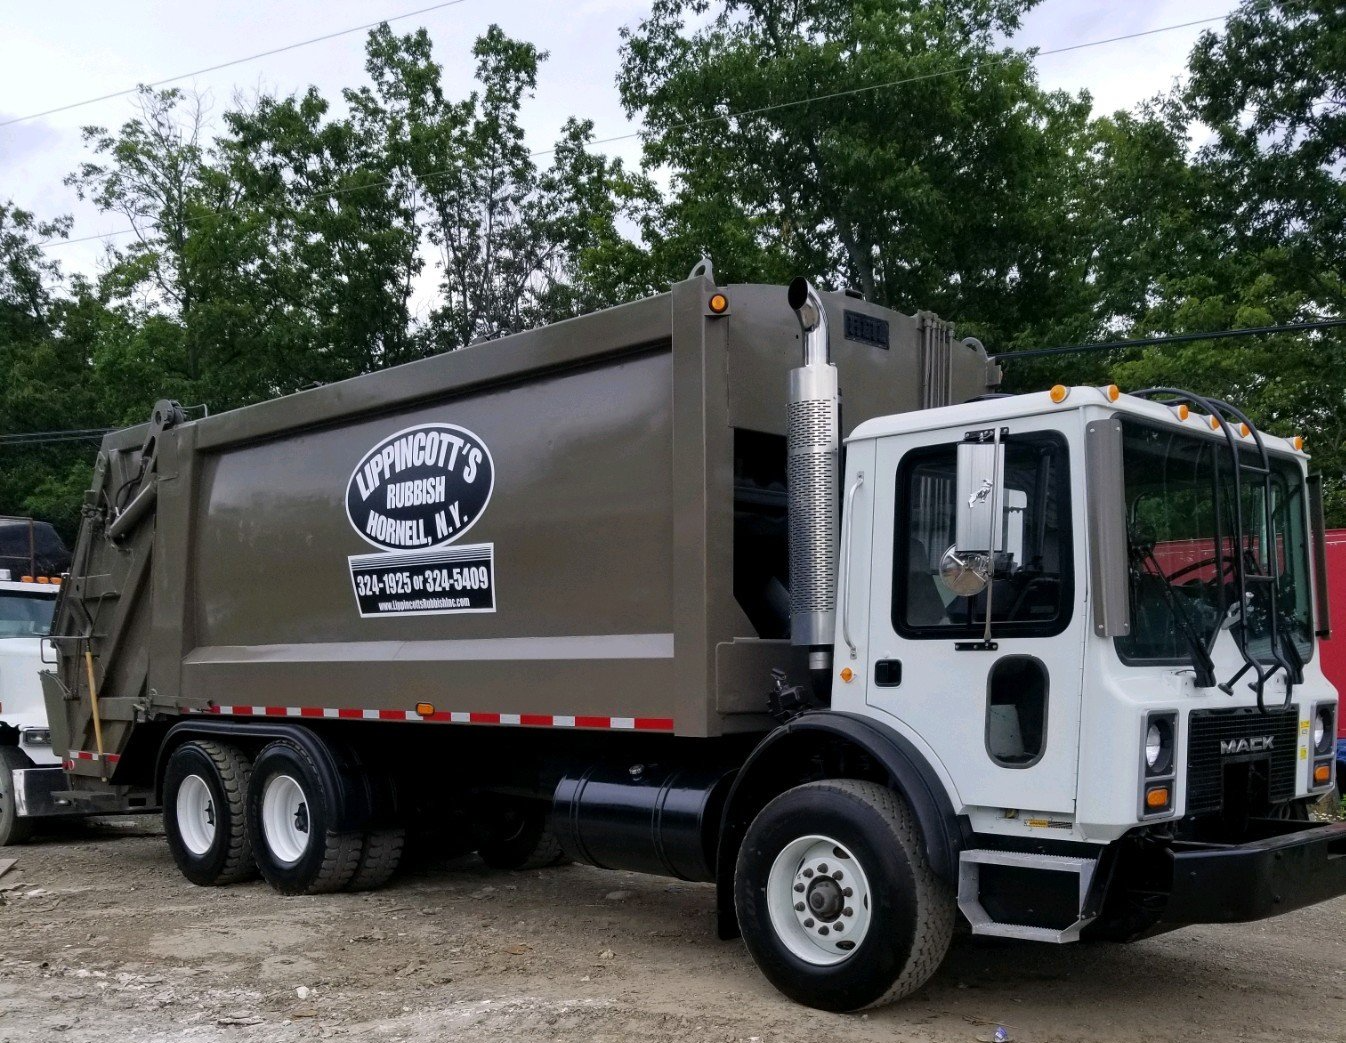 Dumpster Rentals in Troupsburg, NY